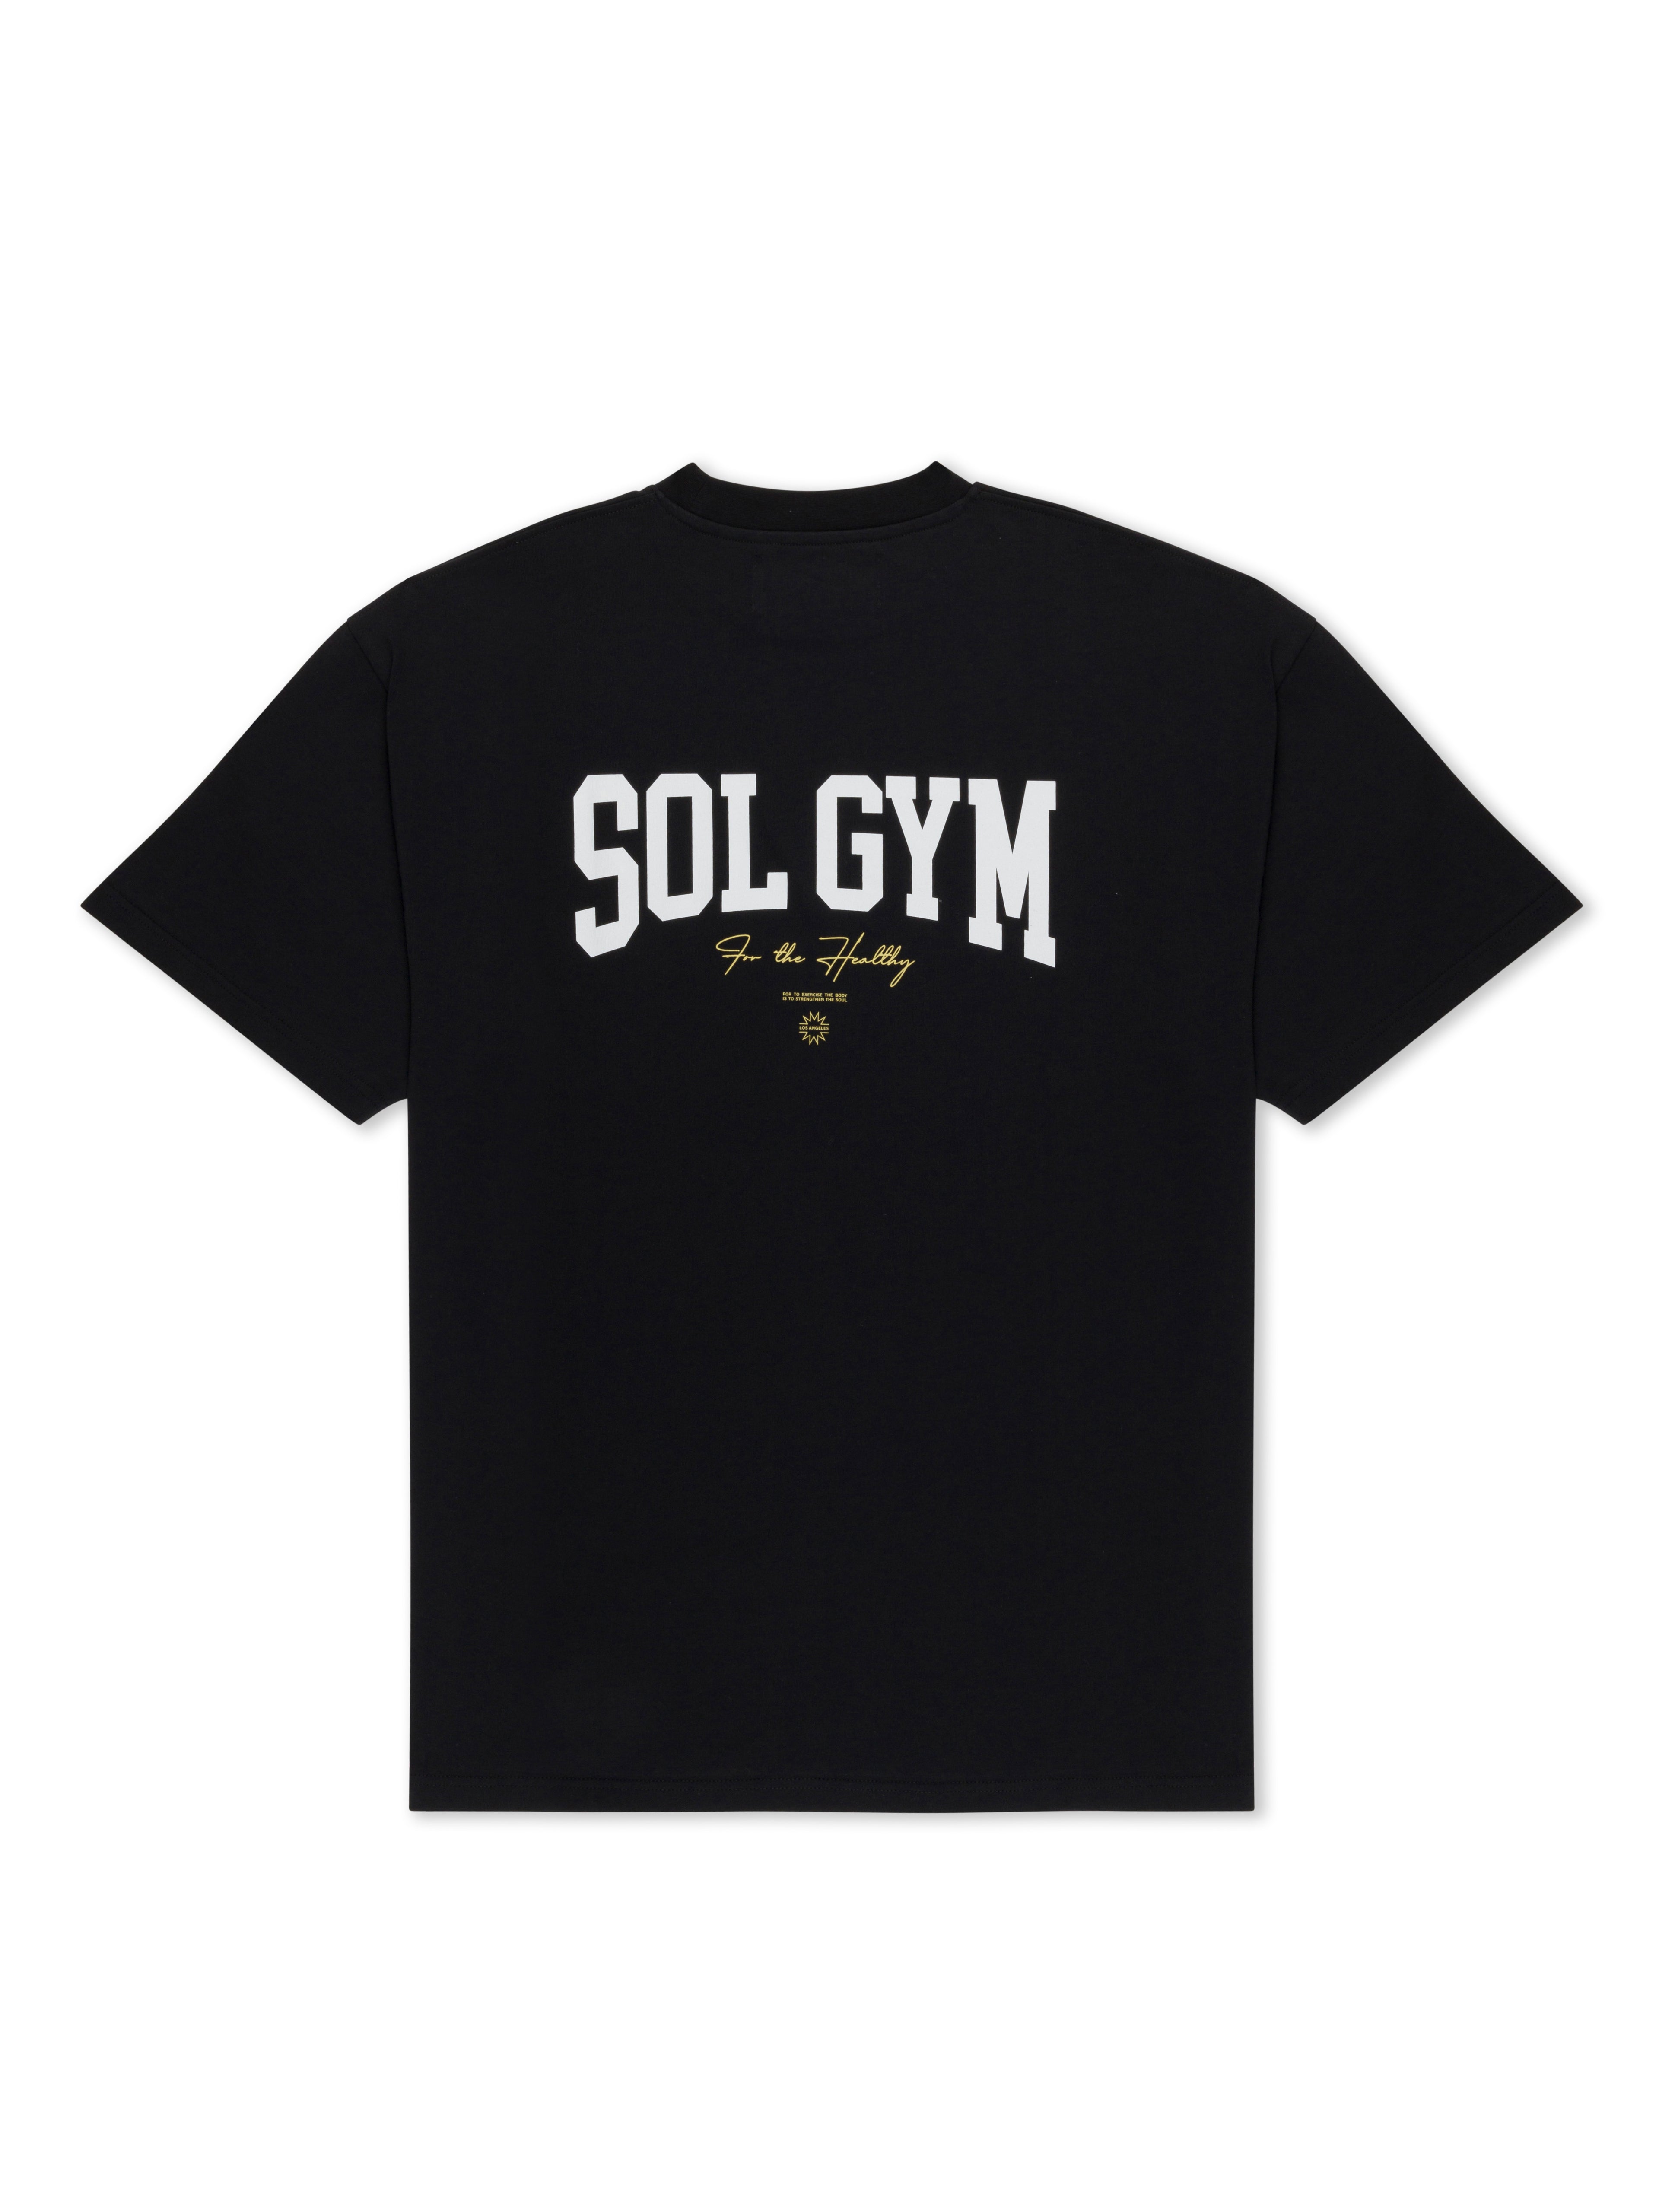 Sol Gym for the Healthy Oversized T-Shirt, Black